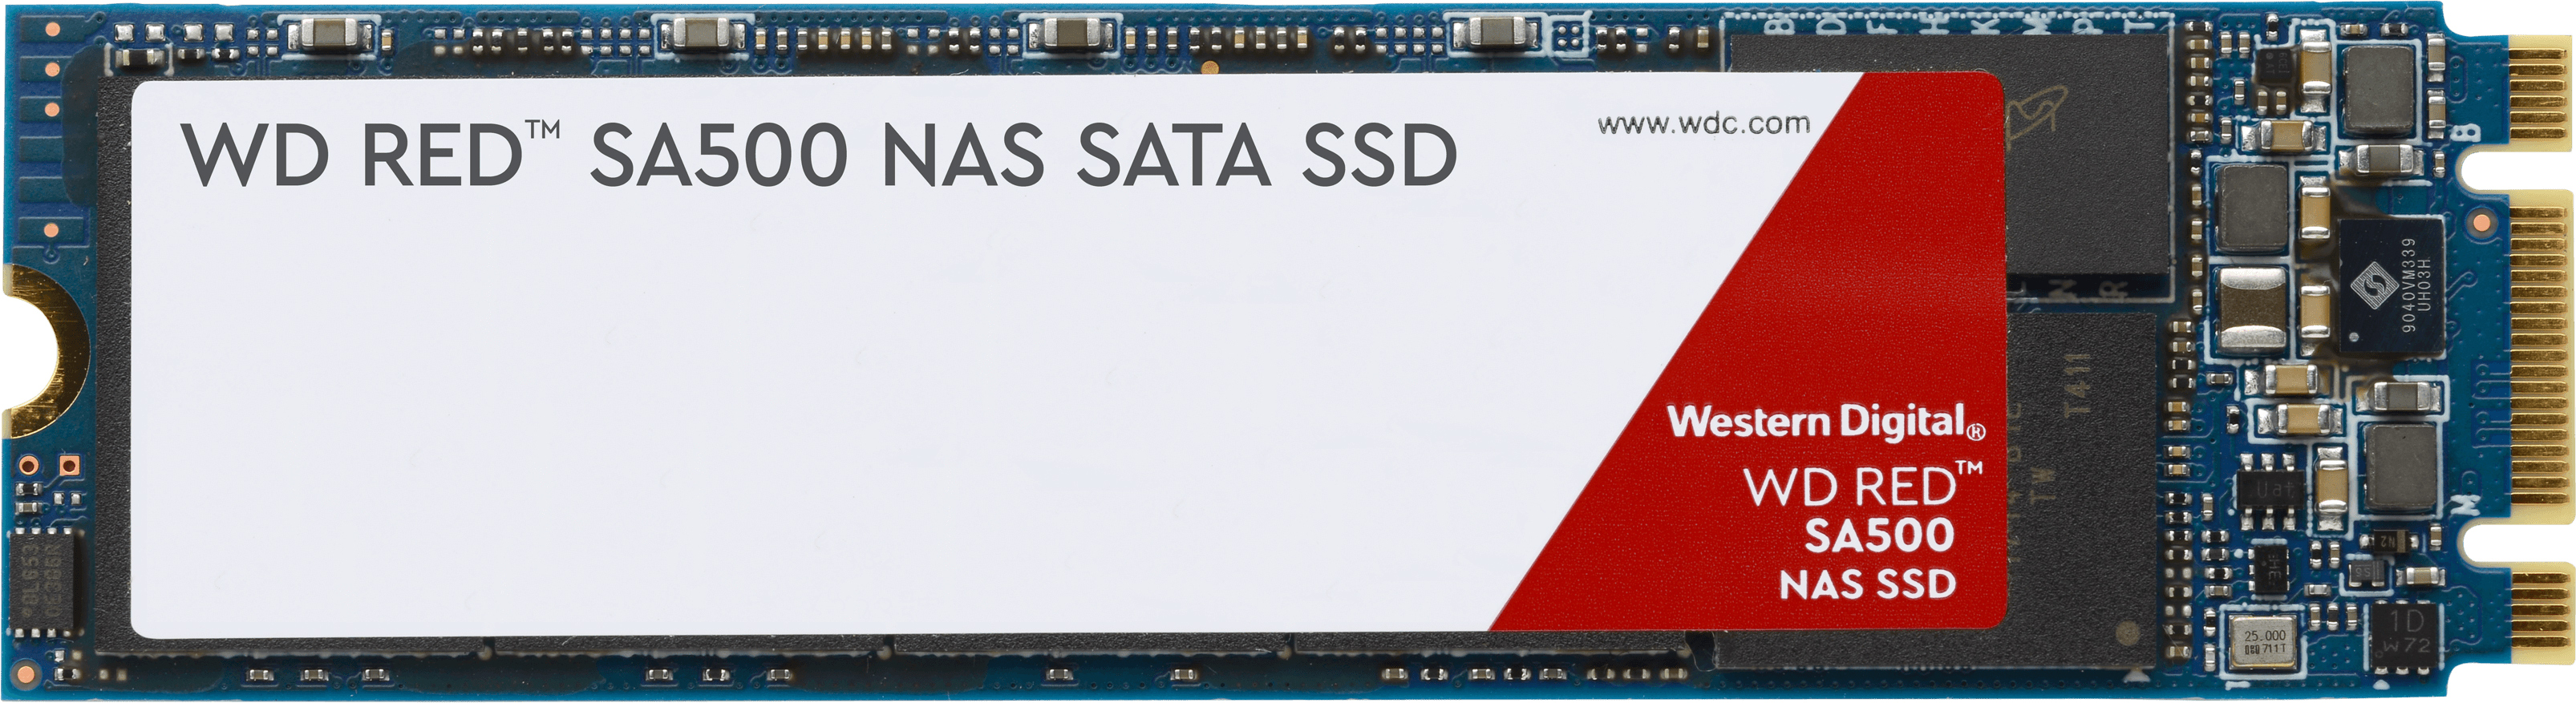 Selskab Skjult sum Western Digital Launches WD Red SA500 Caching SSDs for NAS